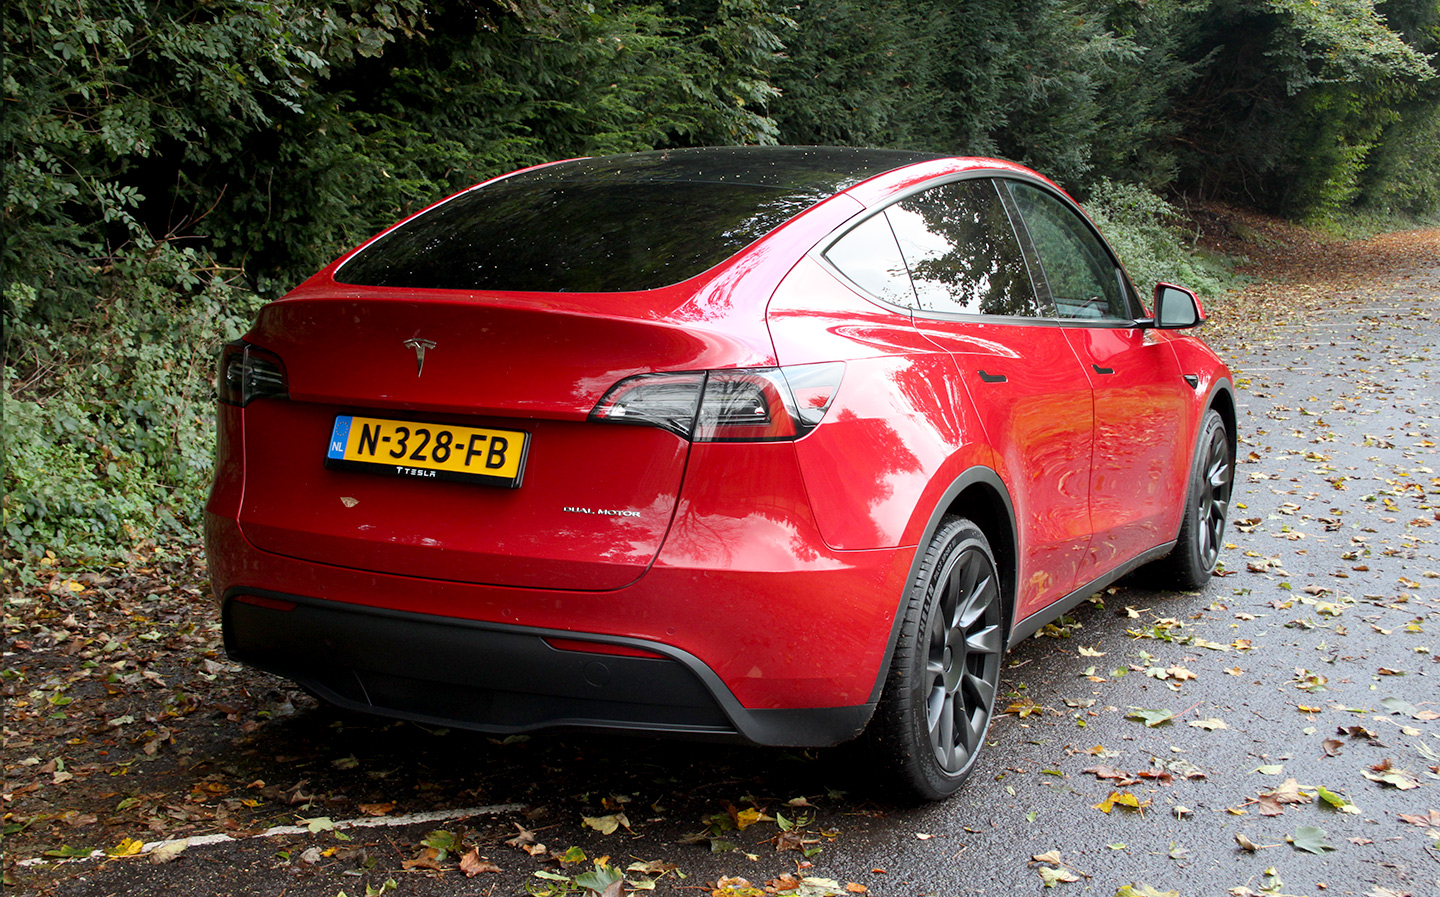 We drove the new Tesla Model Y in the UK and found its one flaw